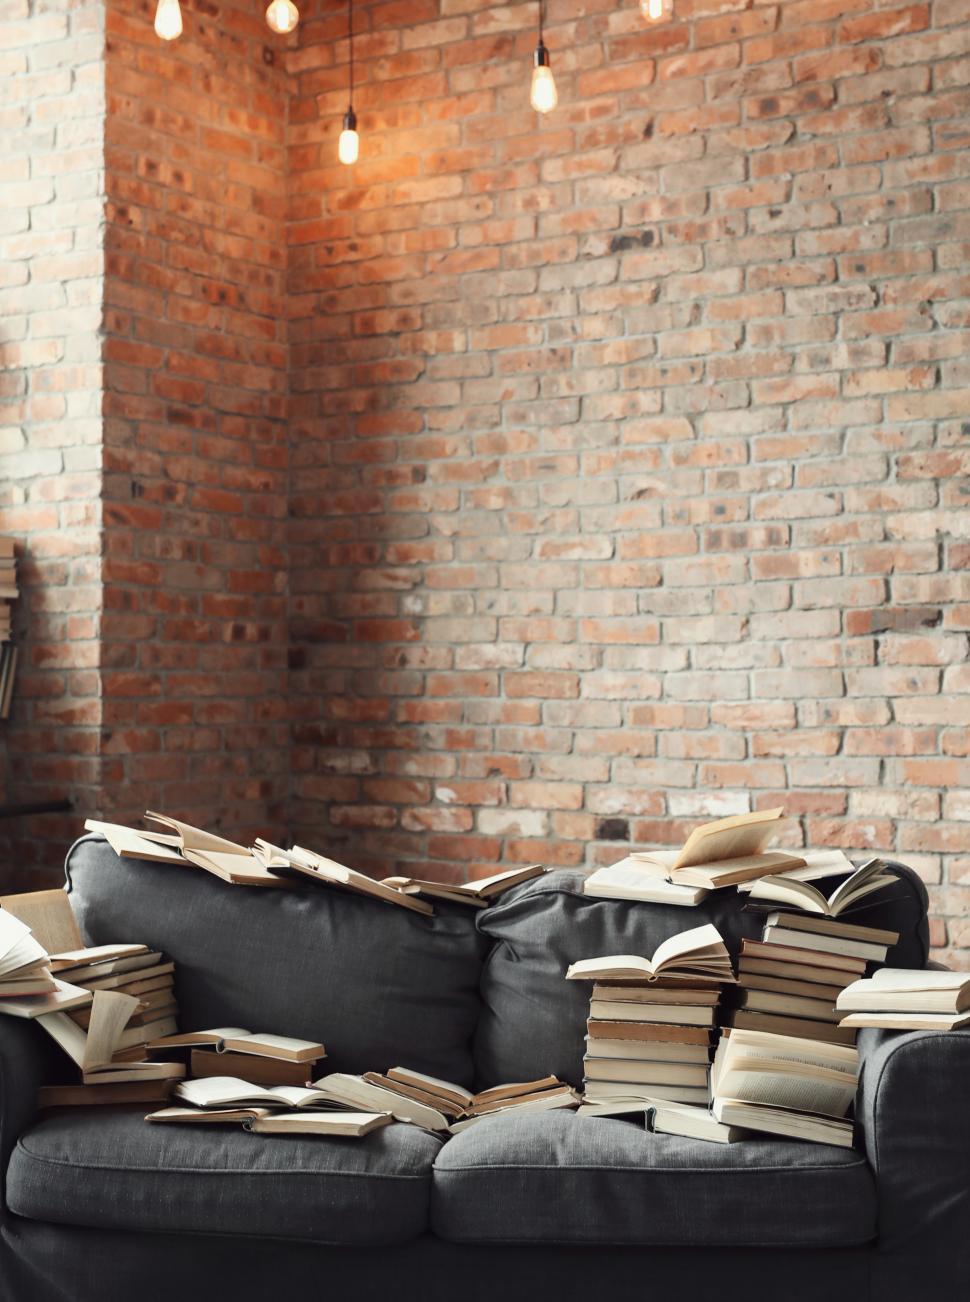 Free Image of Couch covered in books 